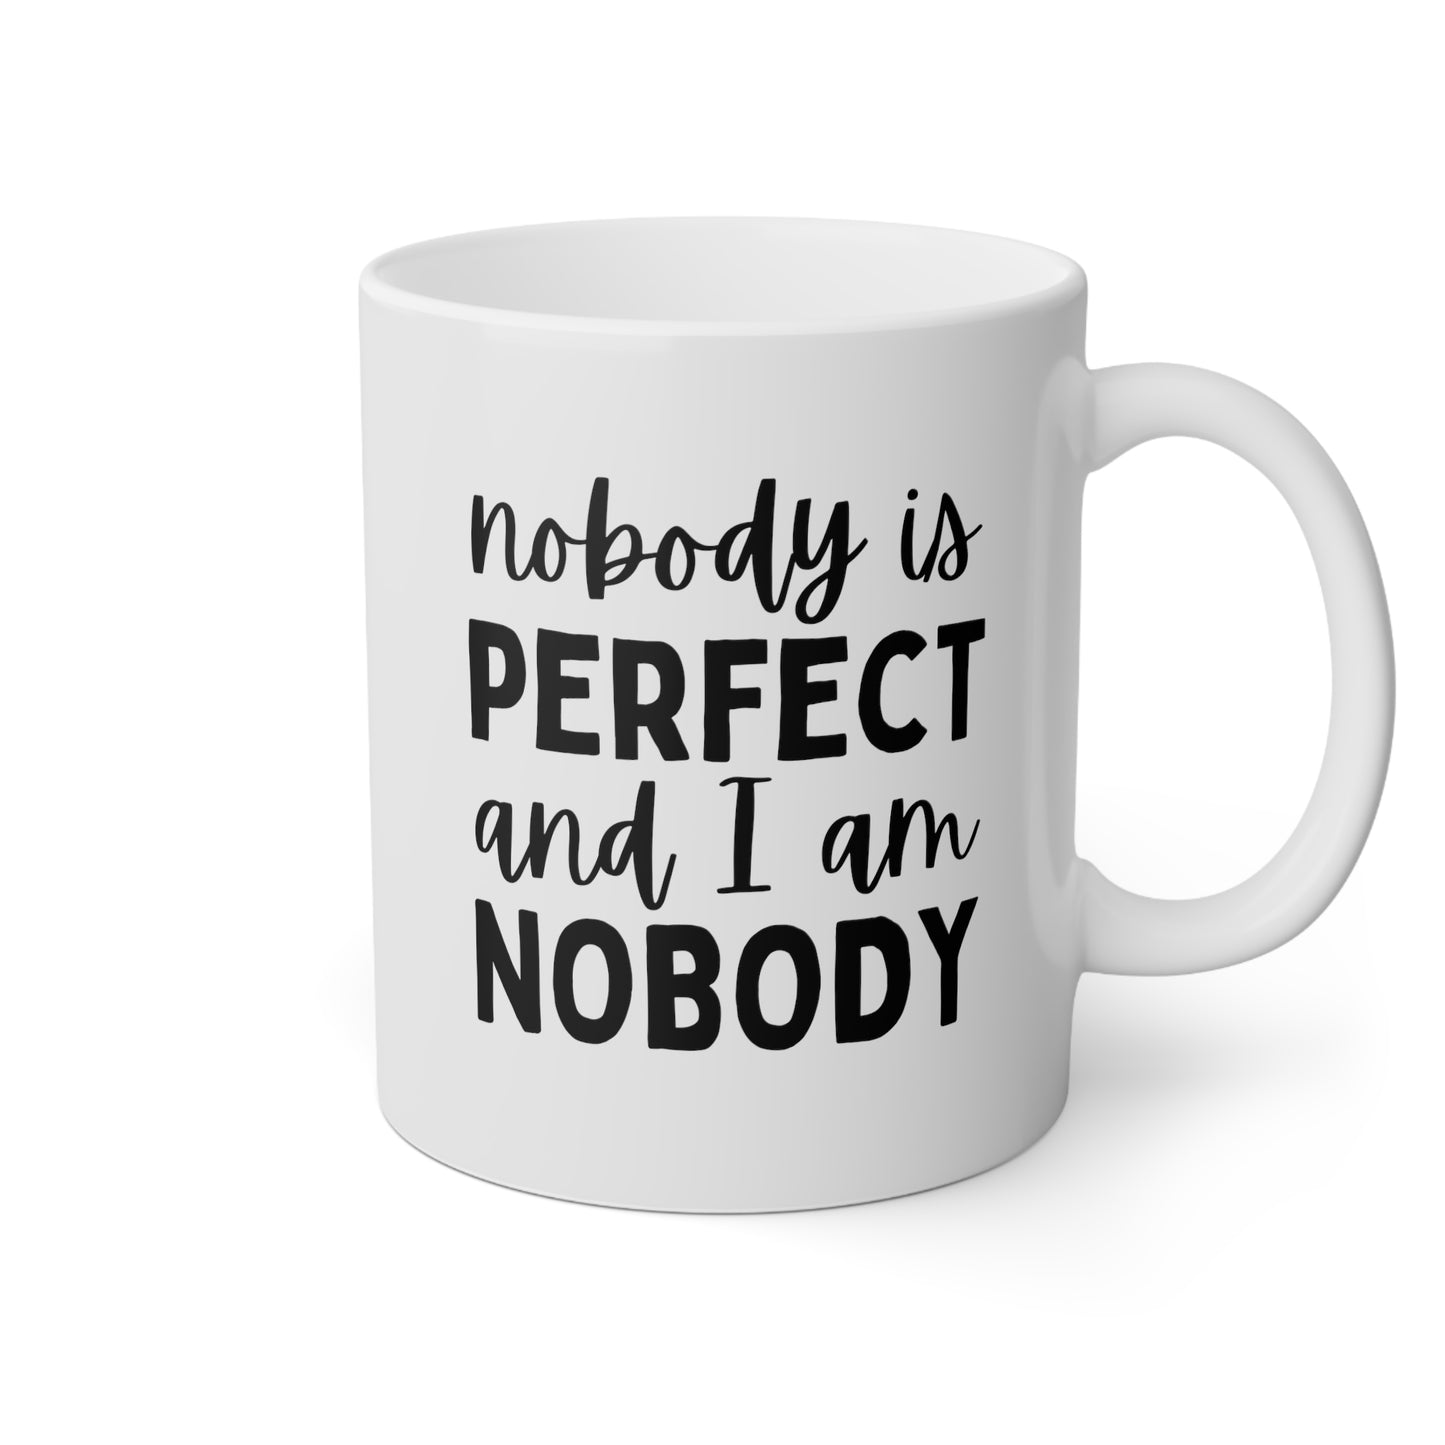 Nobody Is Perfect And I Am Nobody 11oz white funny large coffee mug gift for best friend sibling novelty geese lover waveywares wavey wares wavywares wavy wares